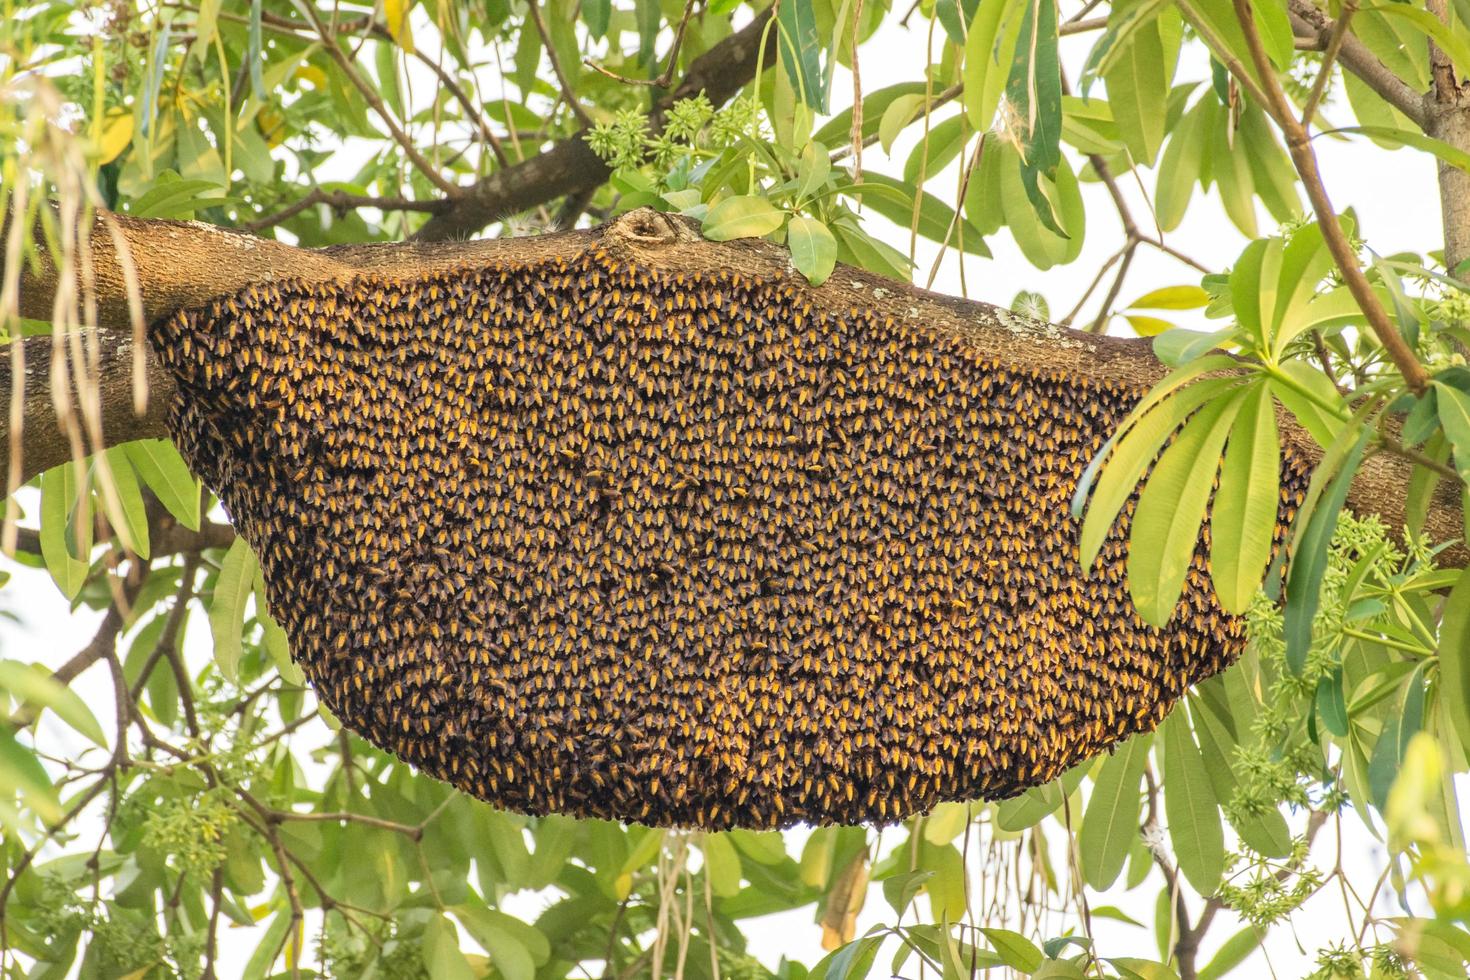 Big Bee hive on branch of tree in nature photo